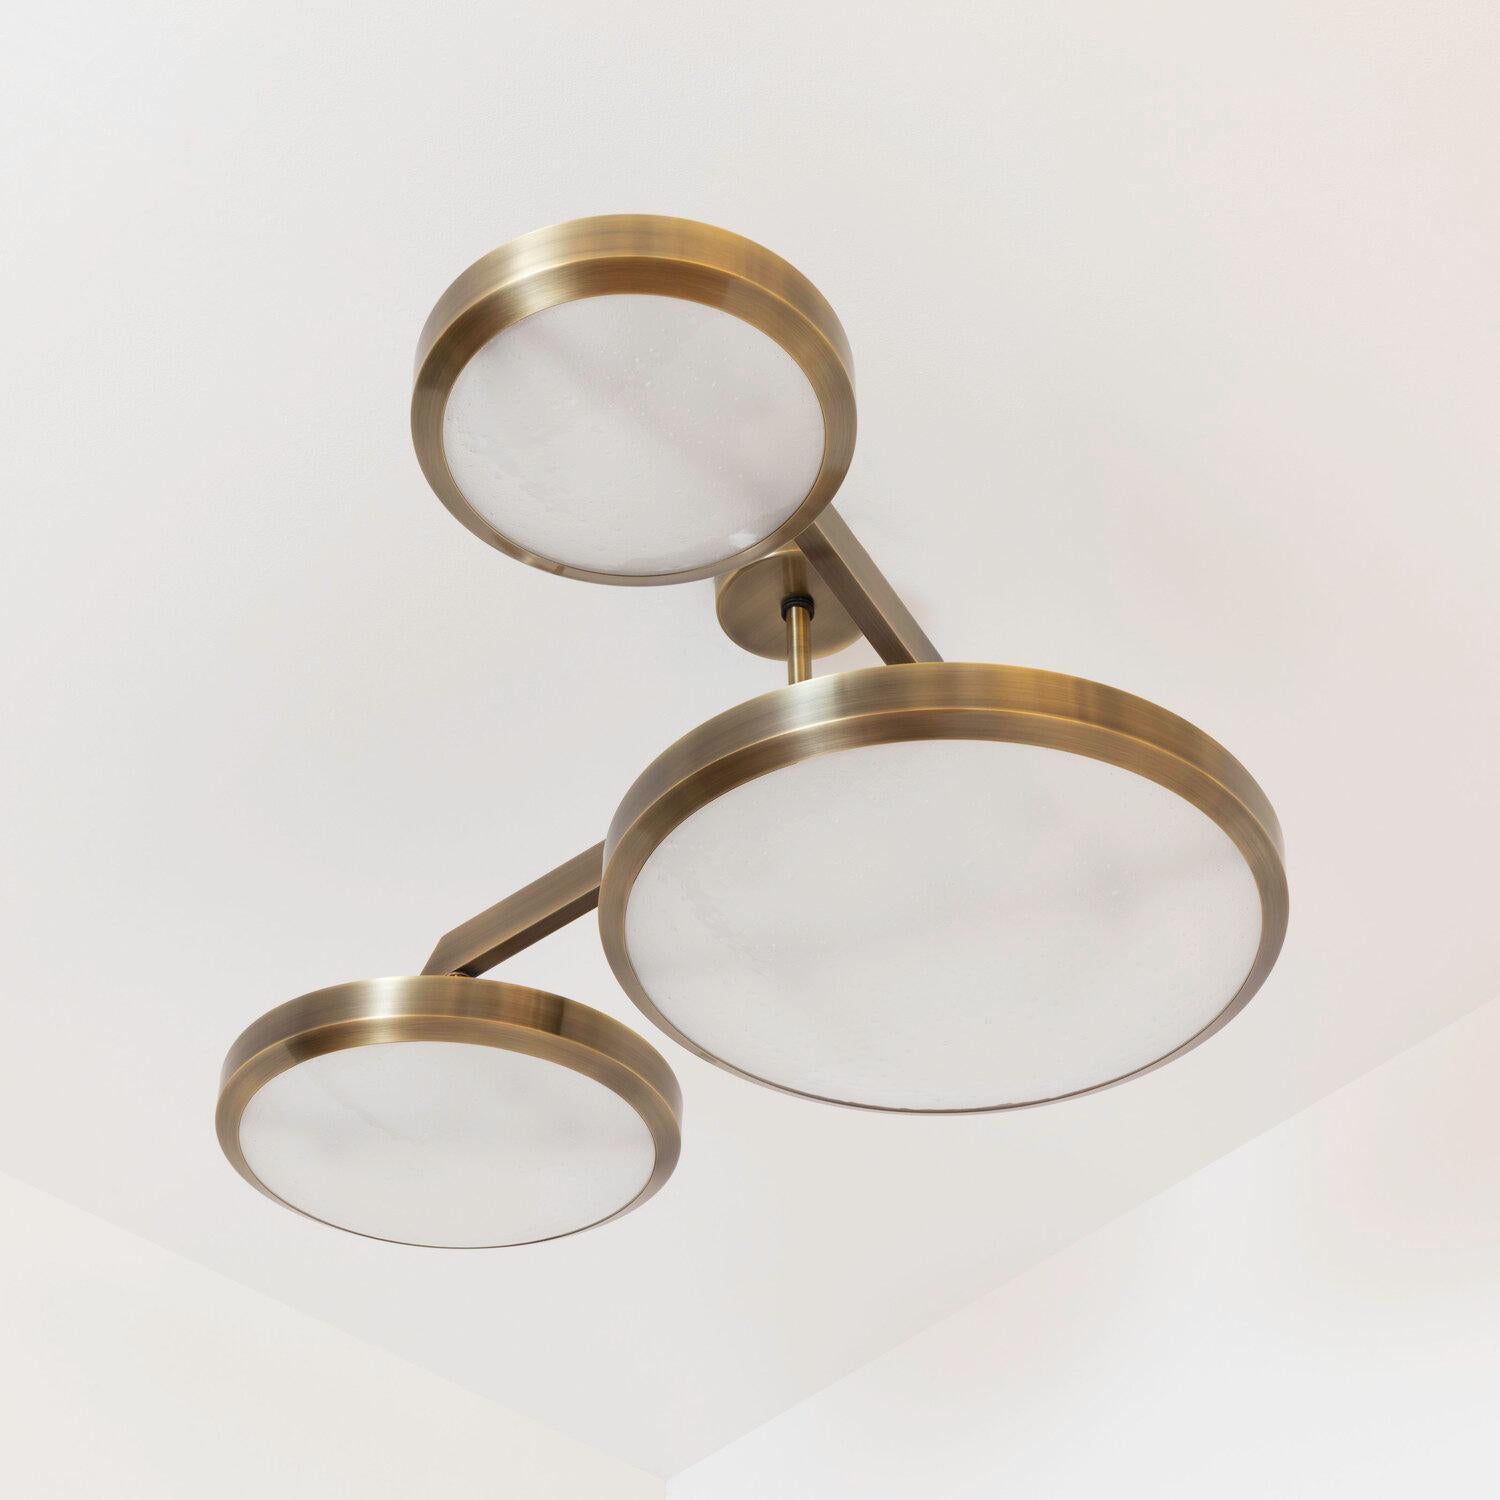 Zeta Ceiling Light by Gaspare Asaro-Satin Brass Finish For Sale 2